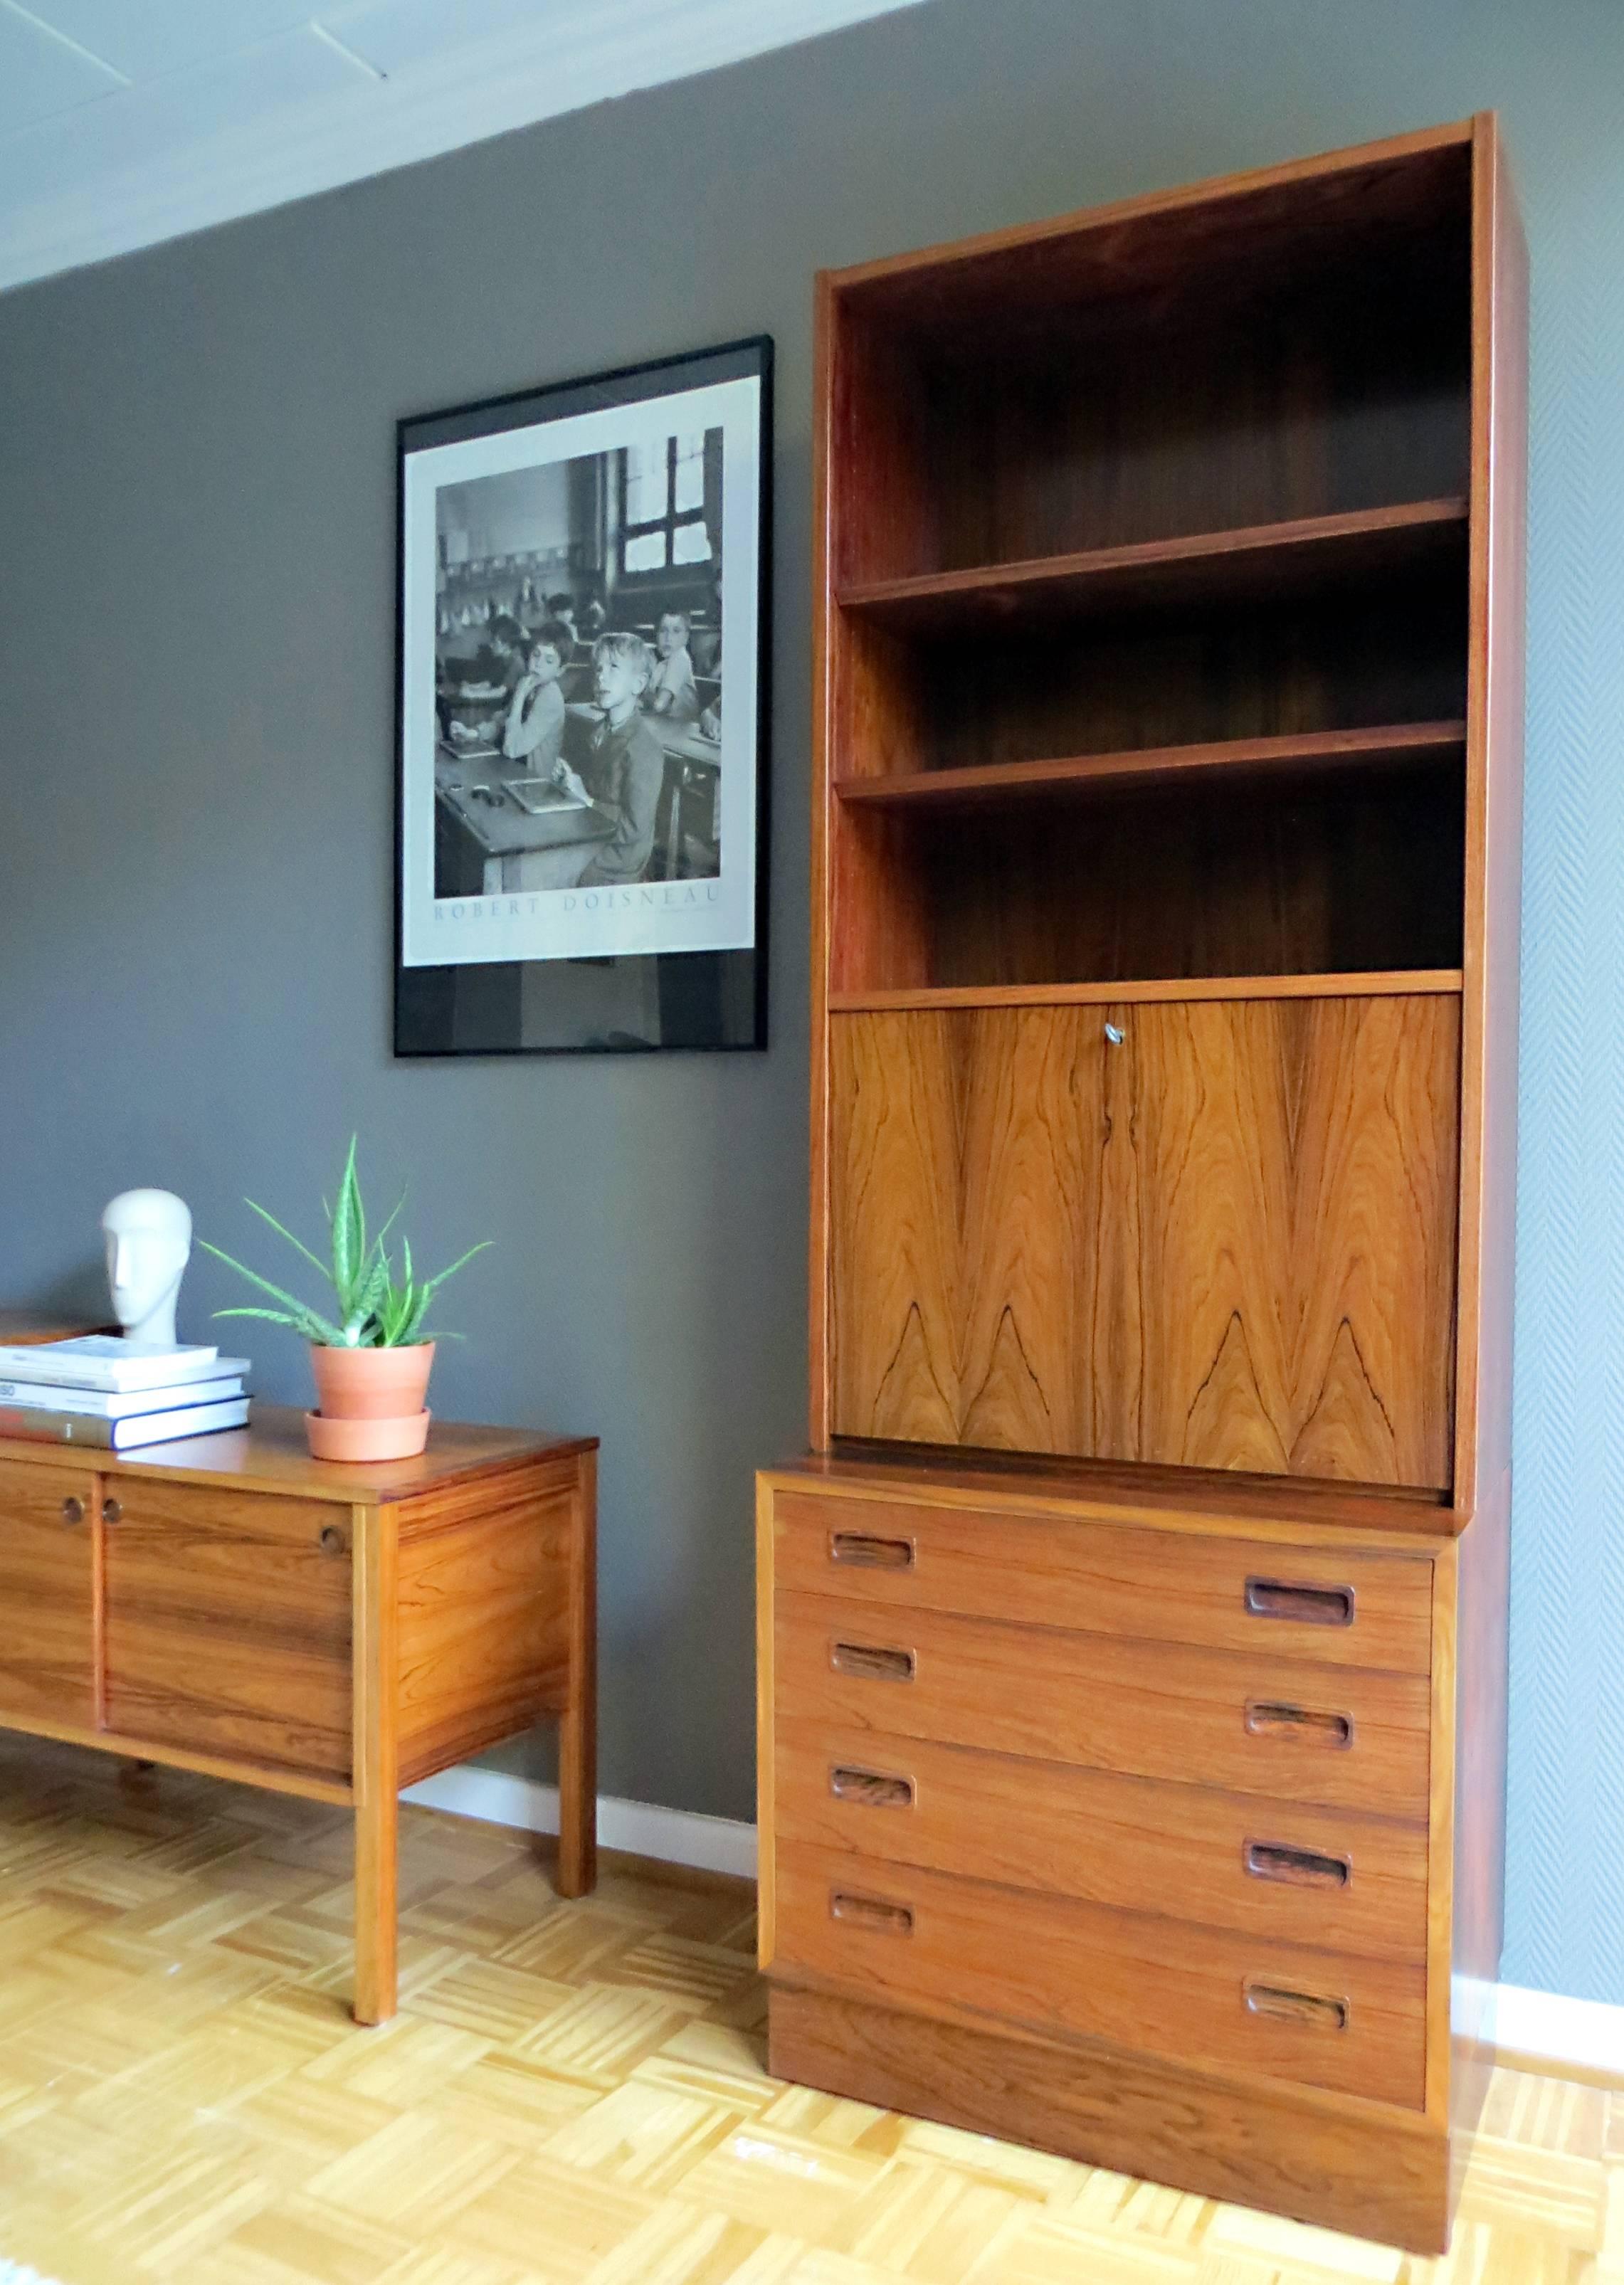 This vintage bookshelf was designed / manufactured in the early 1960s by Poul Hundevad & Co. in Denmark.
It is from two-part and can be used in many different ways as a secretaire, shelves and a chest or dresser.

The particularity of this wall unit